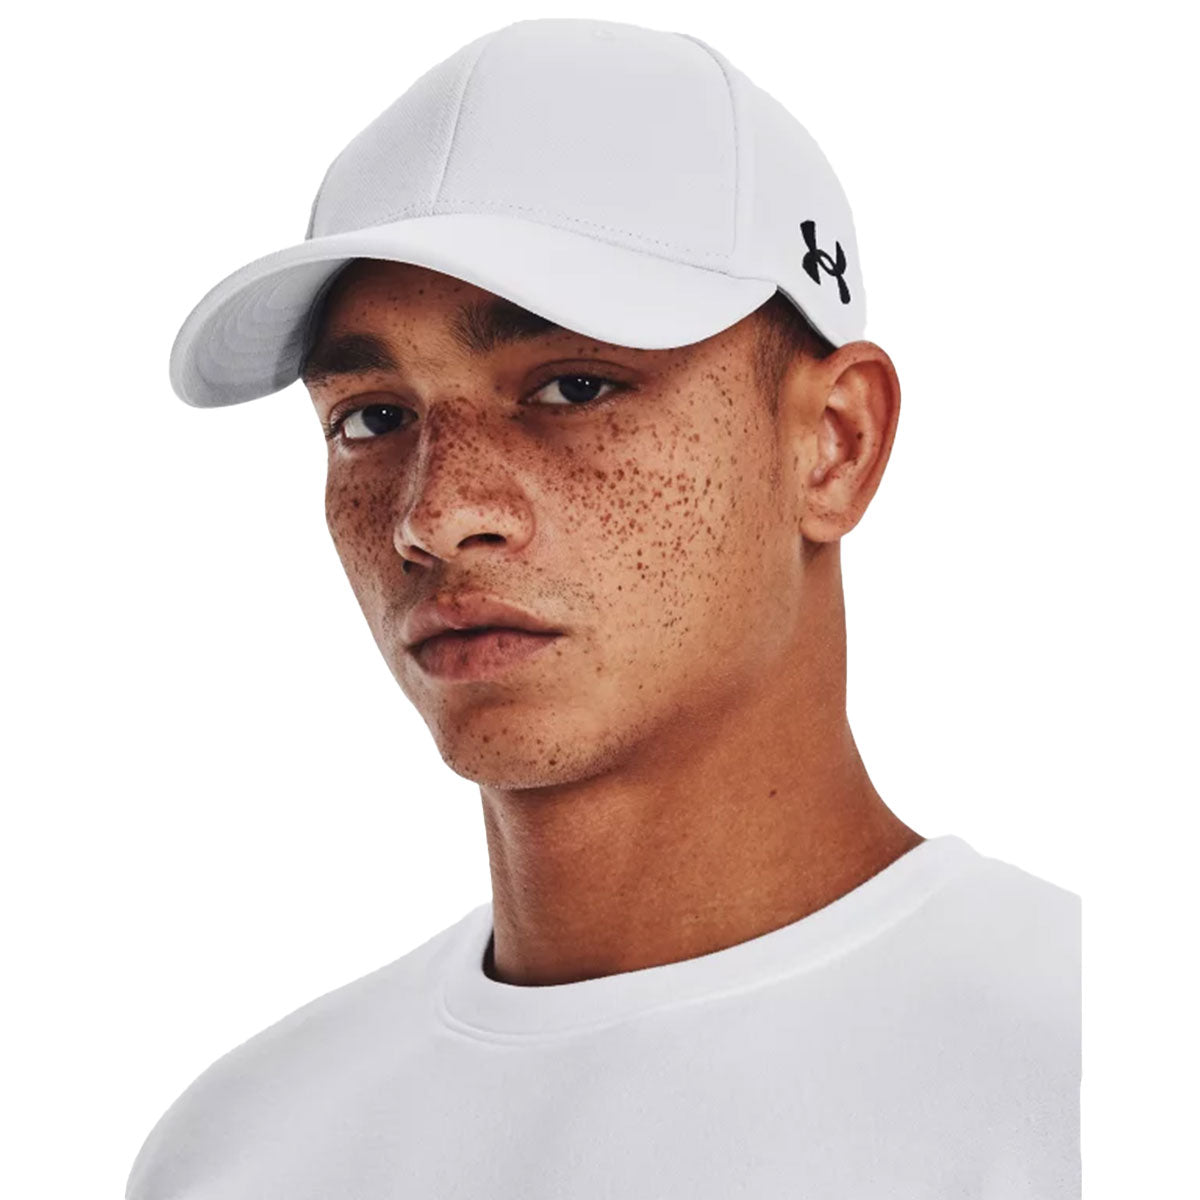 Buy Under Armour Blitzing Cap from the Laura Ashley online shop